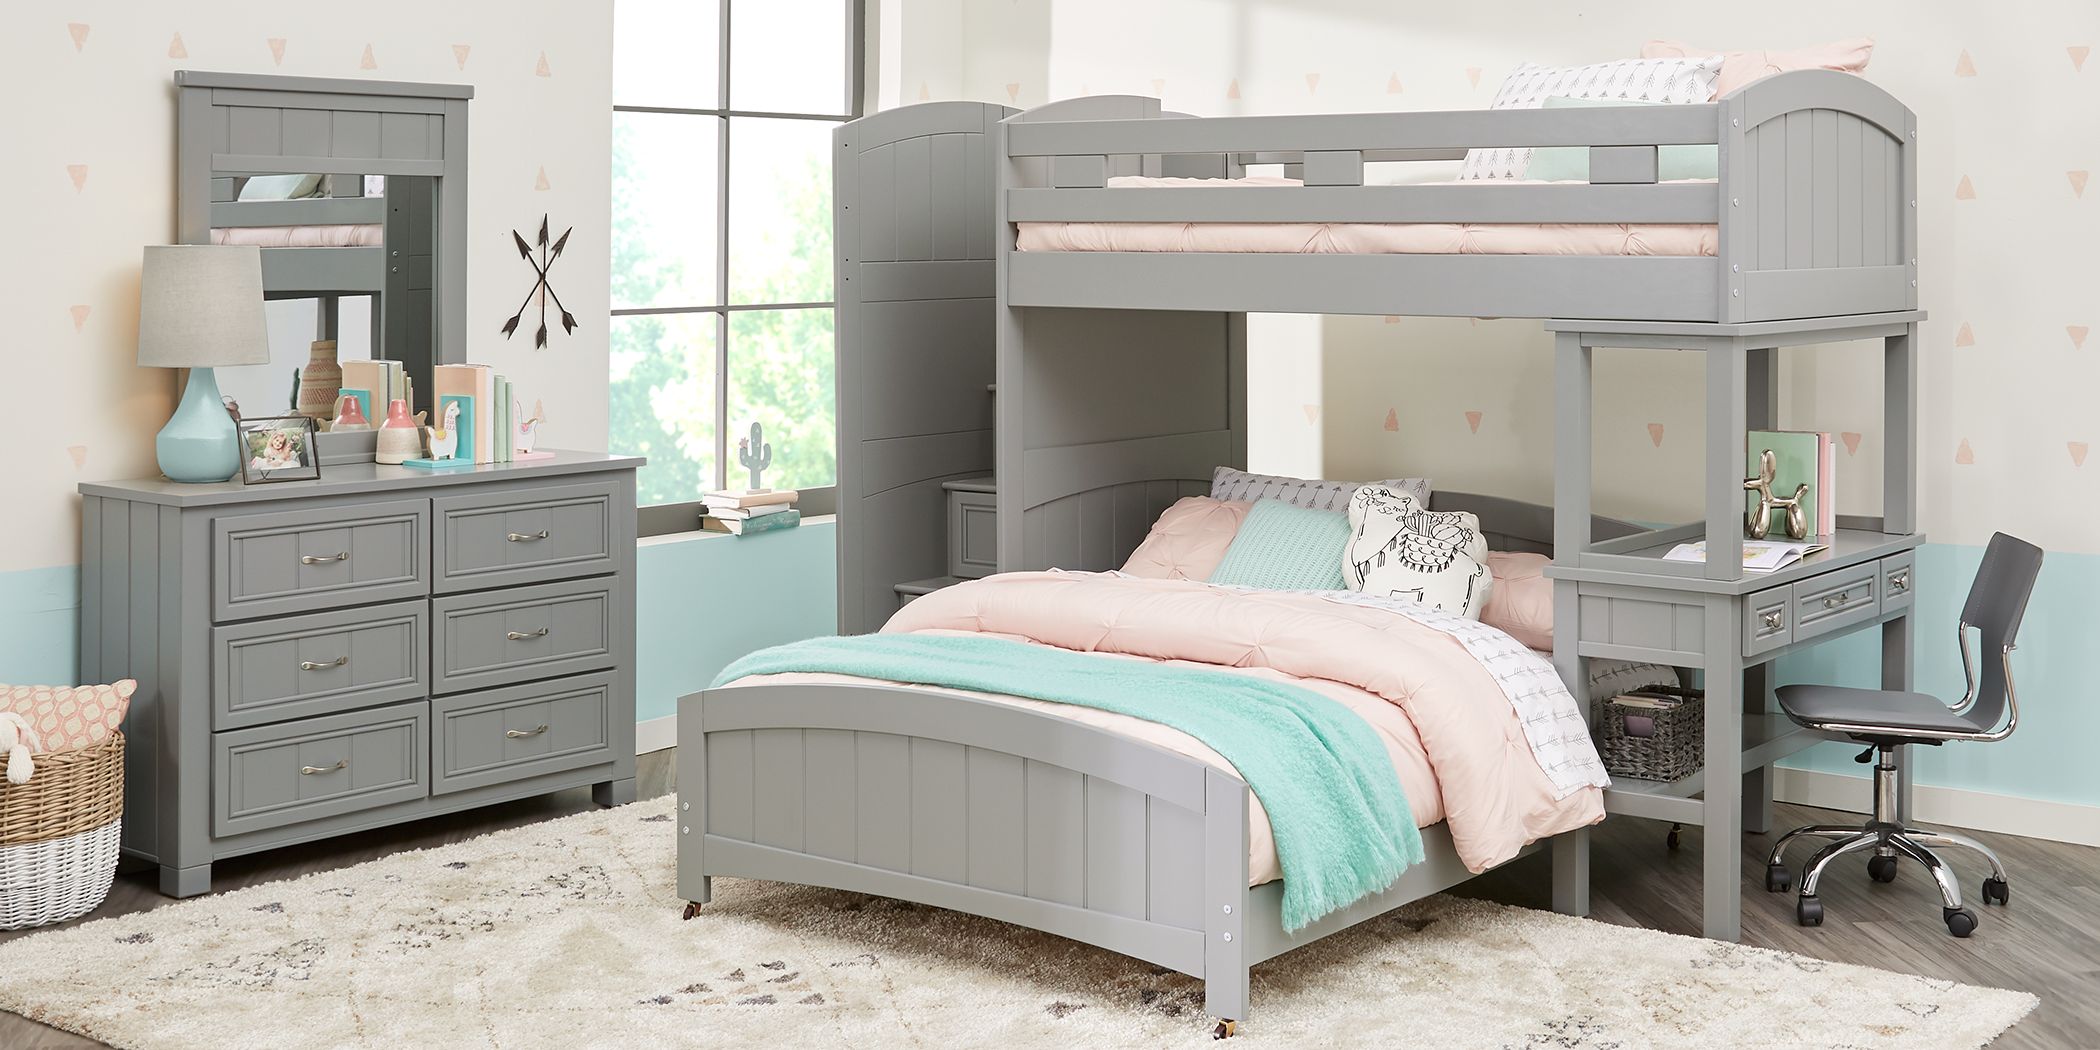 girl bunk beds with storage